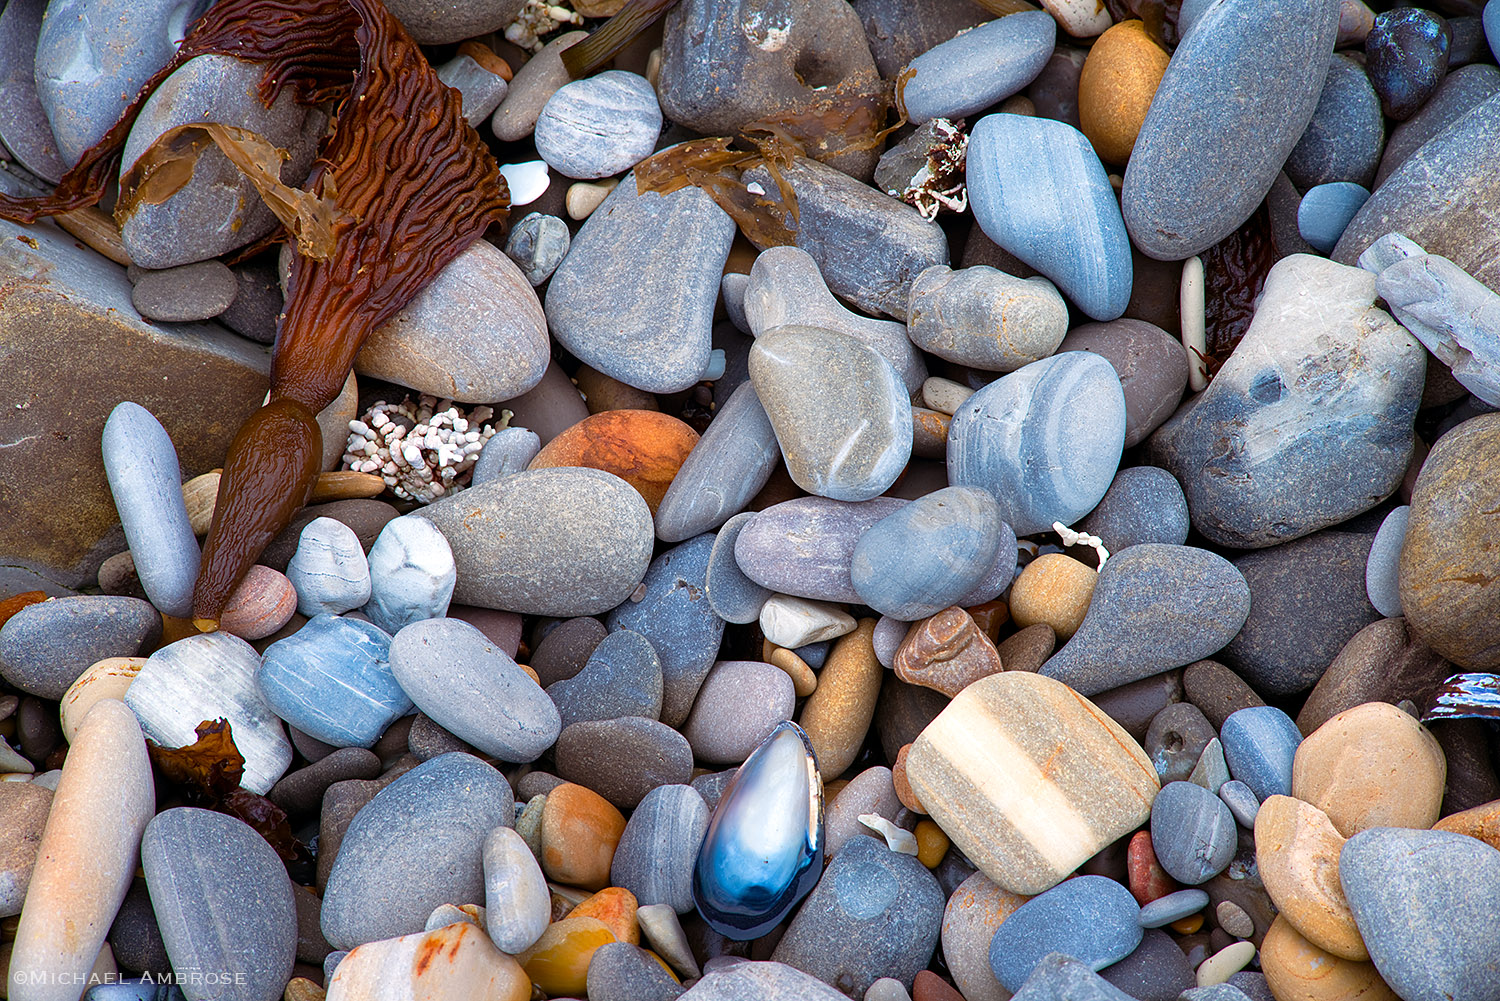 Ocean polished pebbles, found on the rocky cliff beaches of Montana de Oro State Park in central California, have a lengthy story to tell.